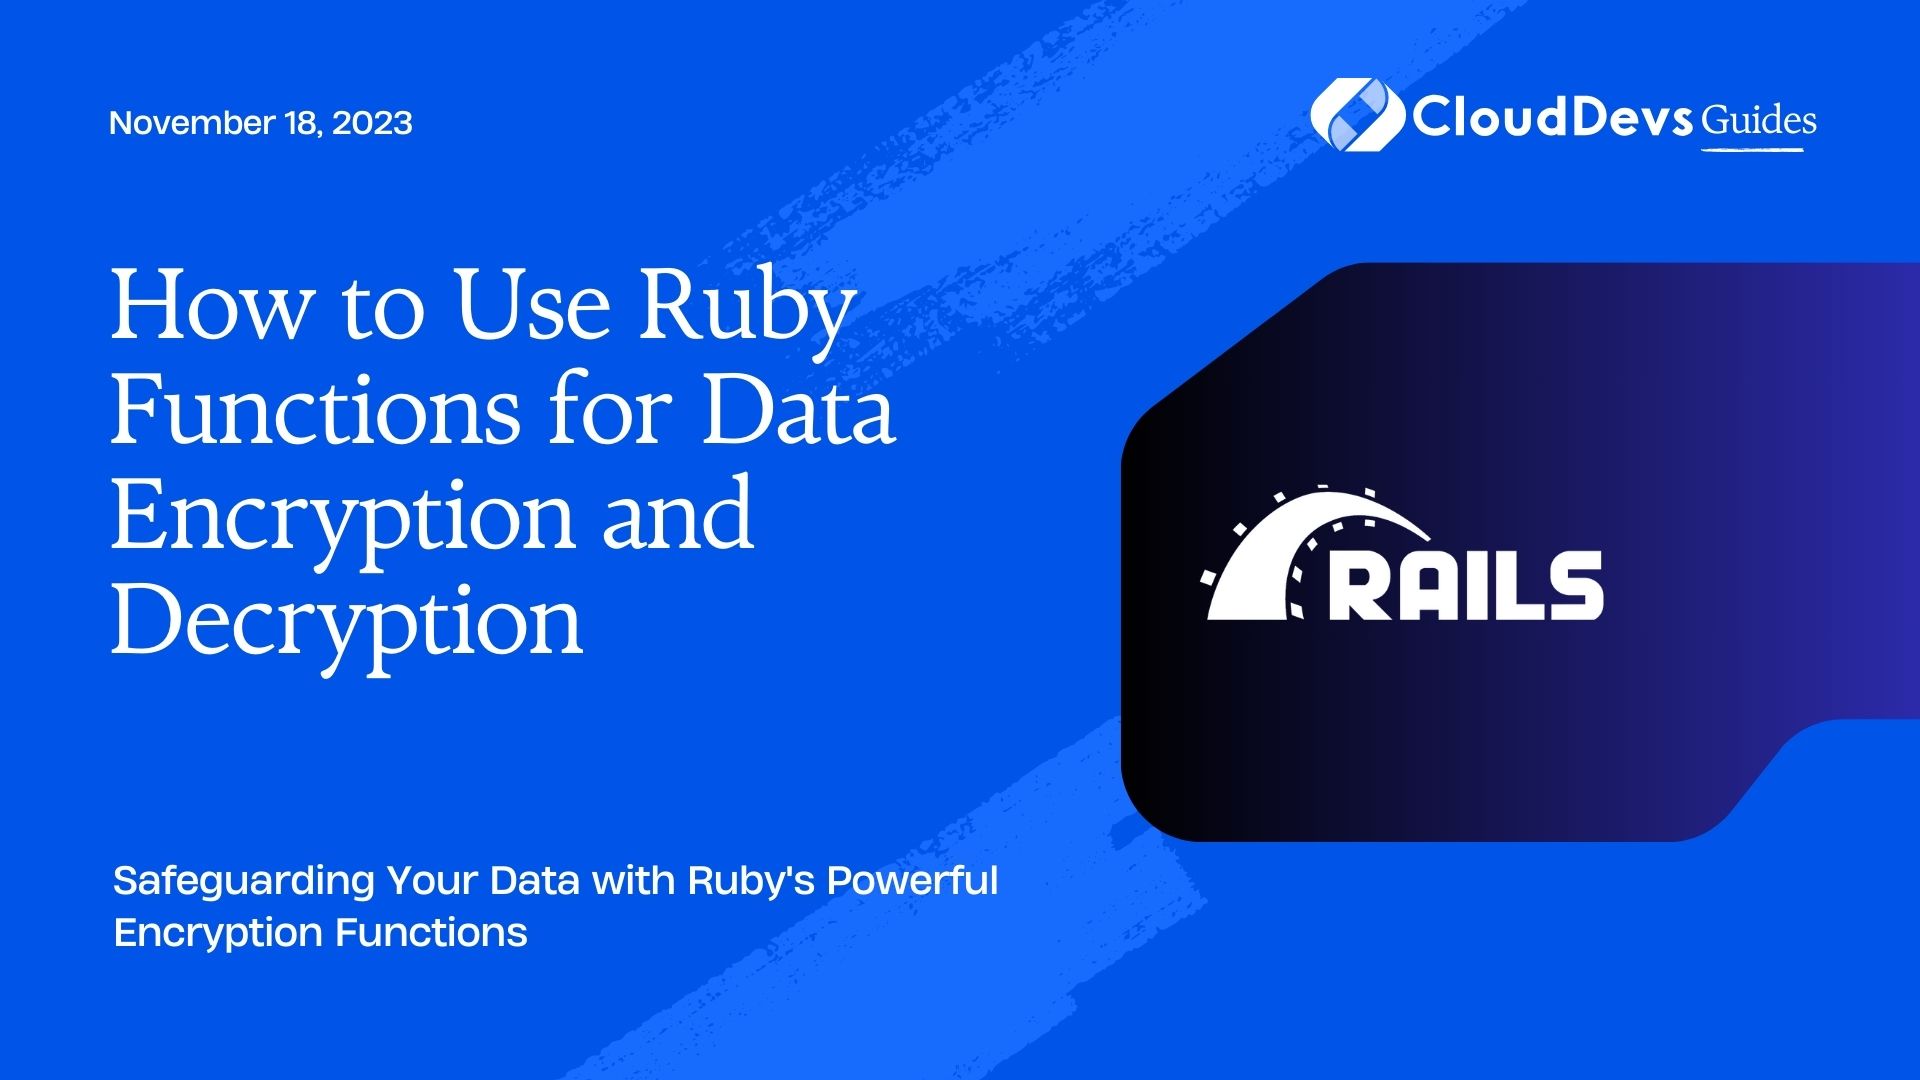 How to Use Ruby Functions for Data Encryption and Decryption